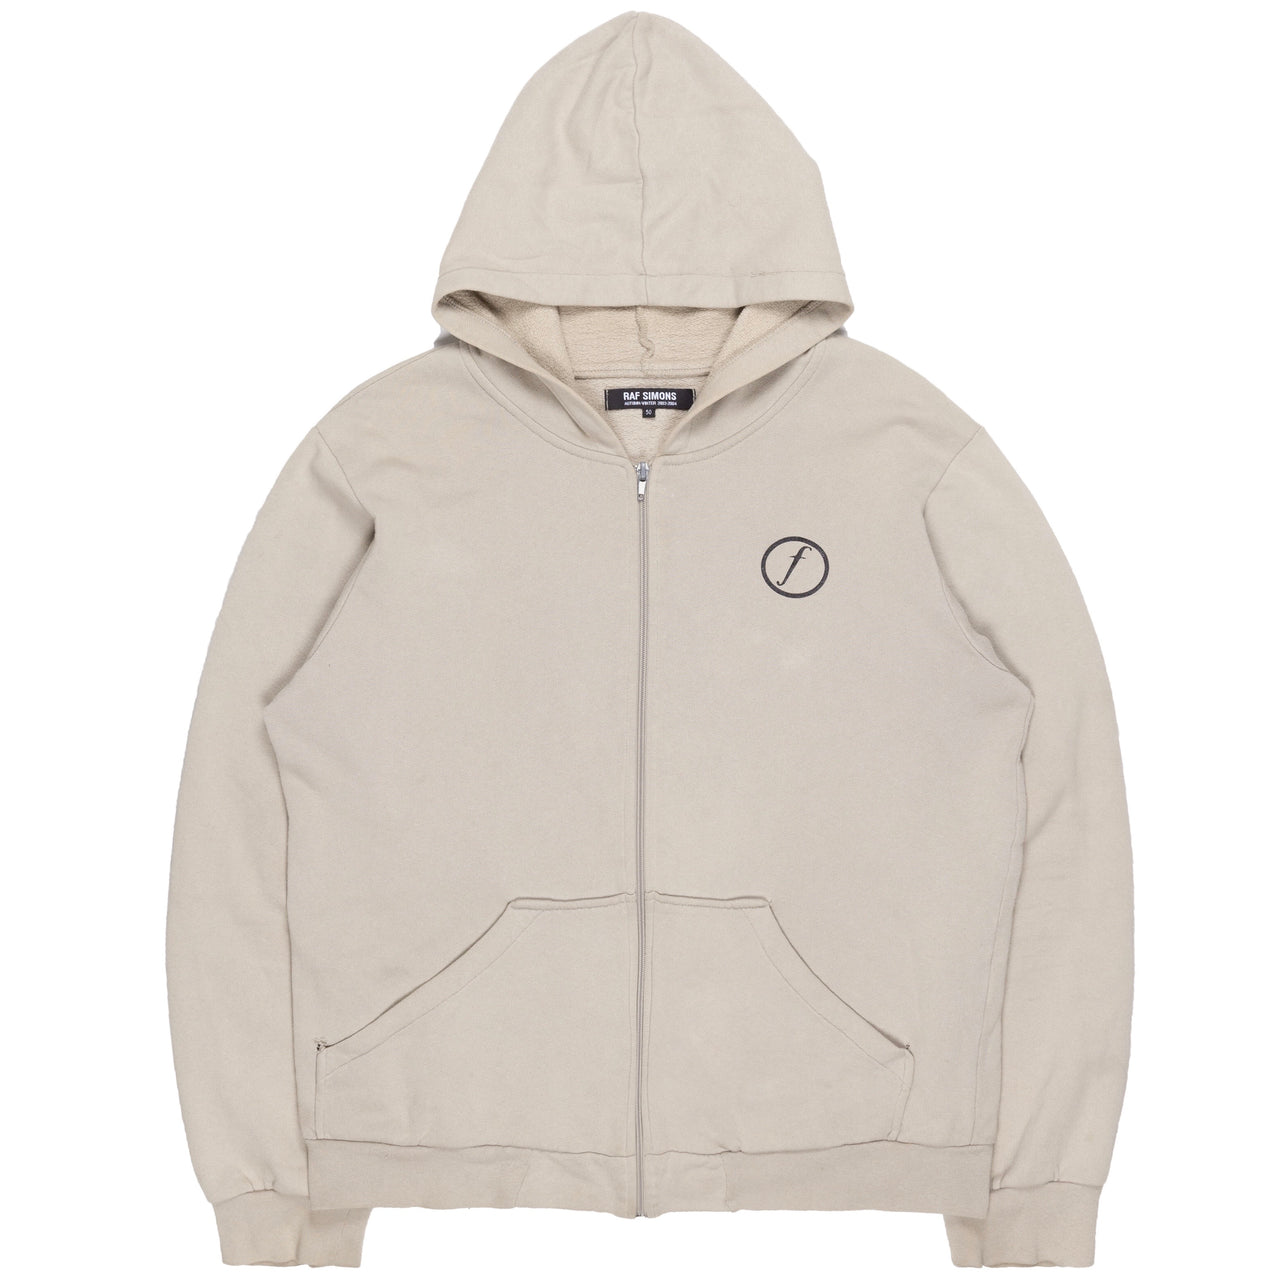 Raf Simons Beige Factory Records Zip-Up Hoodie - AW03 “Closer”